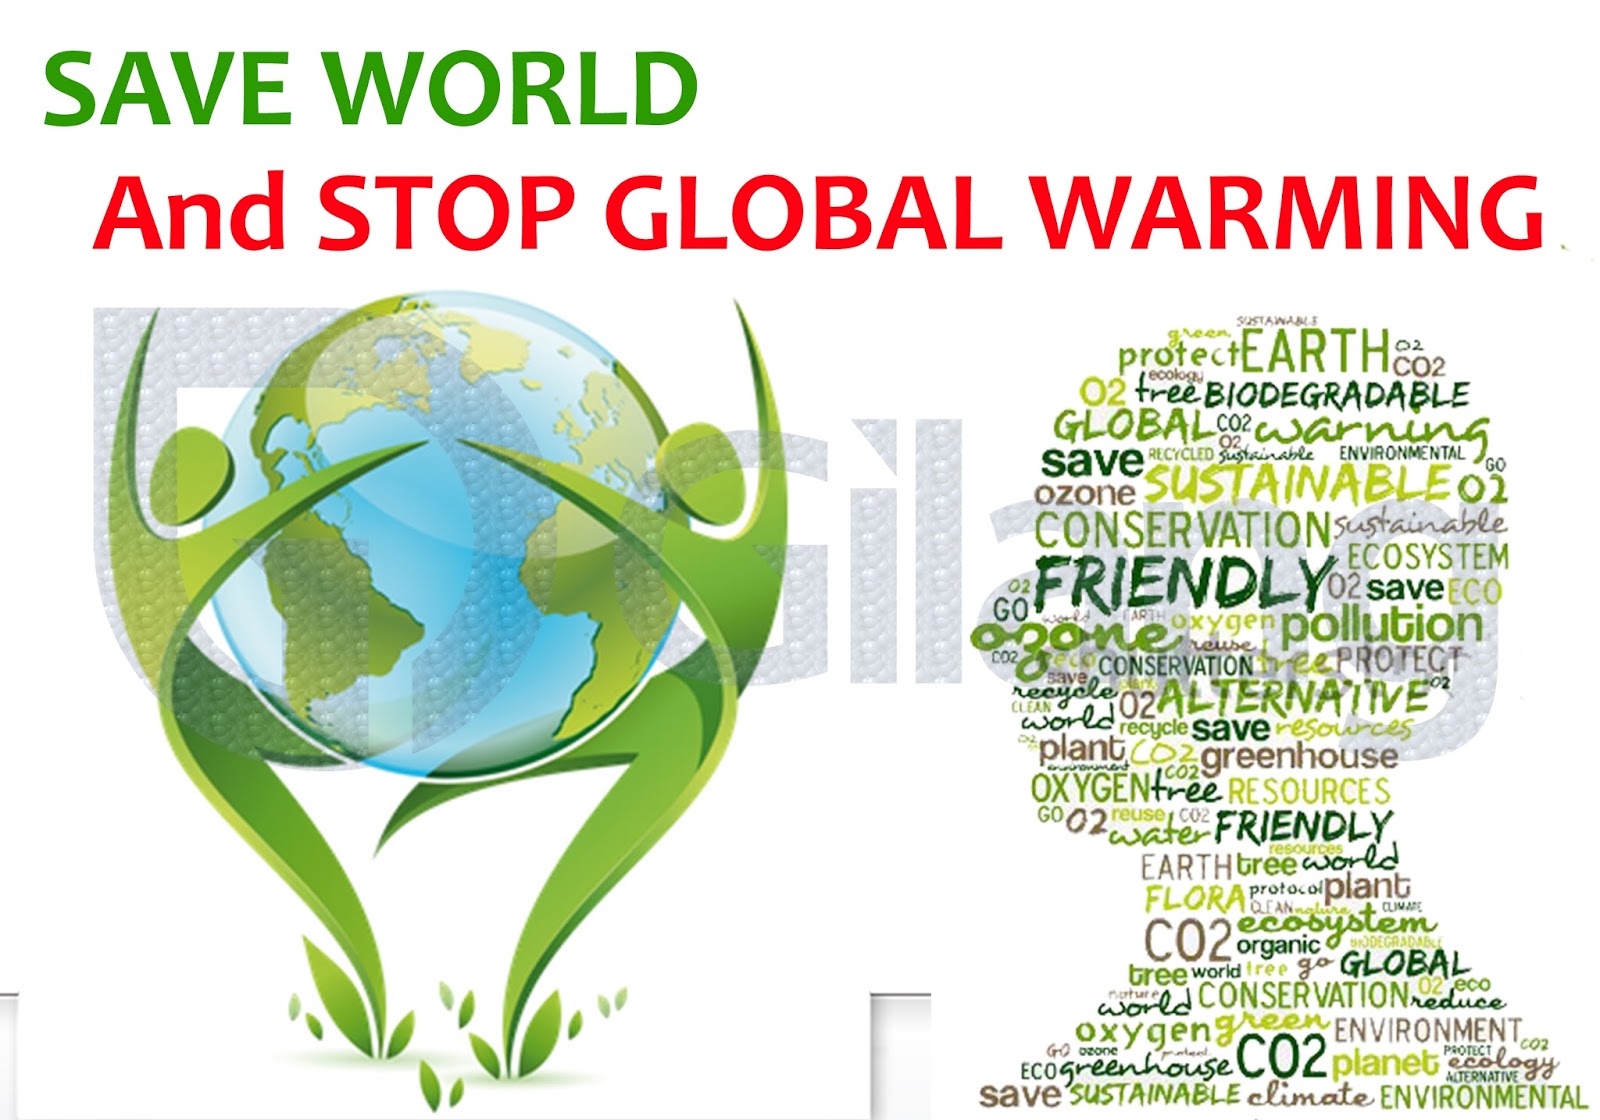 Save this world. Save the World. Global Conservation. Save Global warming. Environment and Global warming.